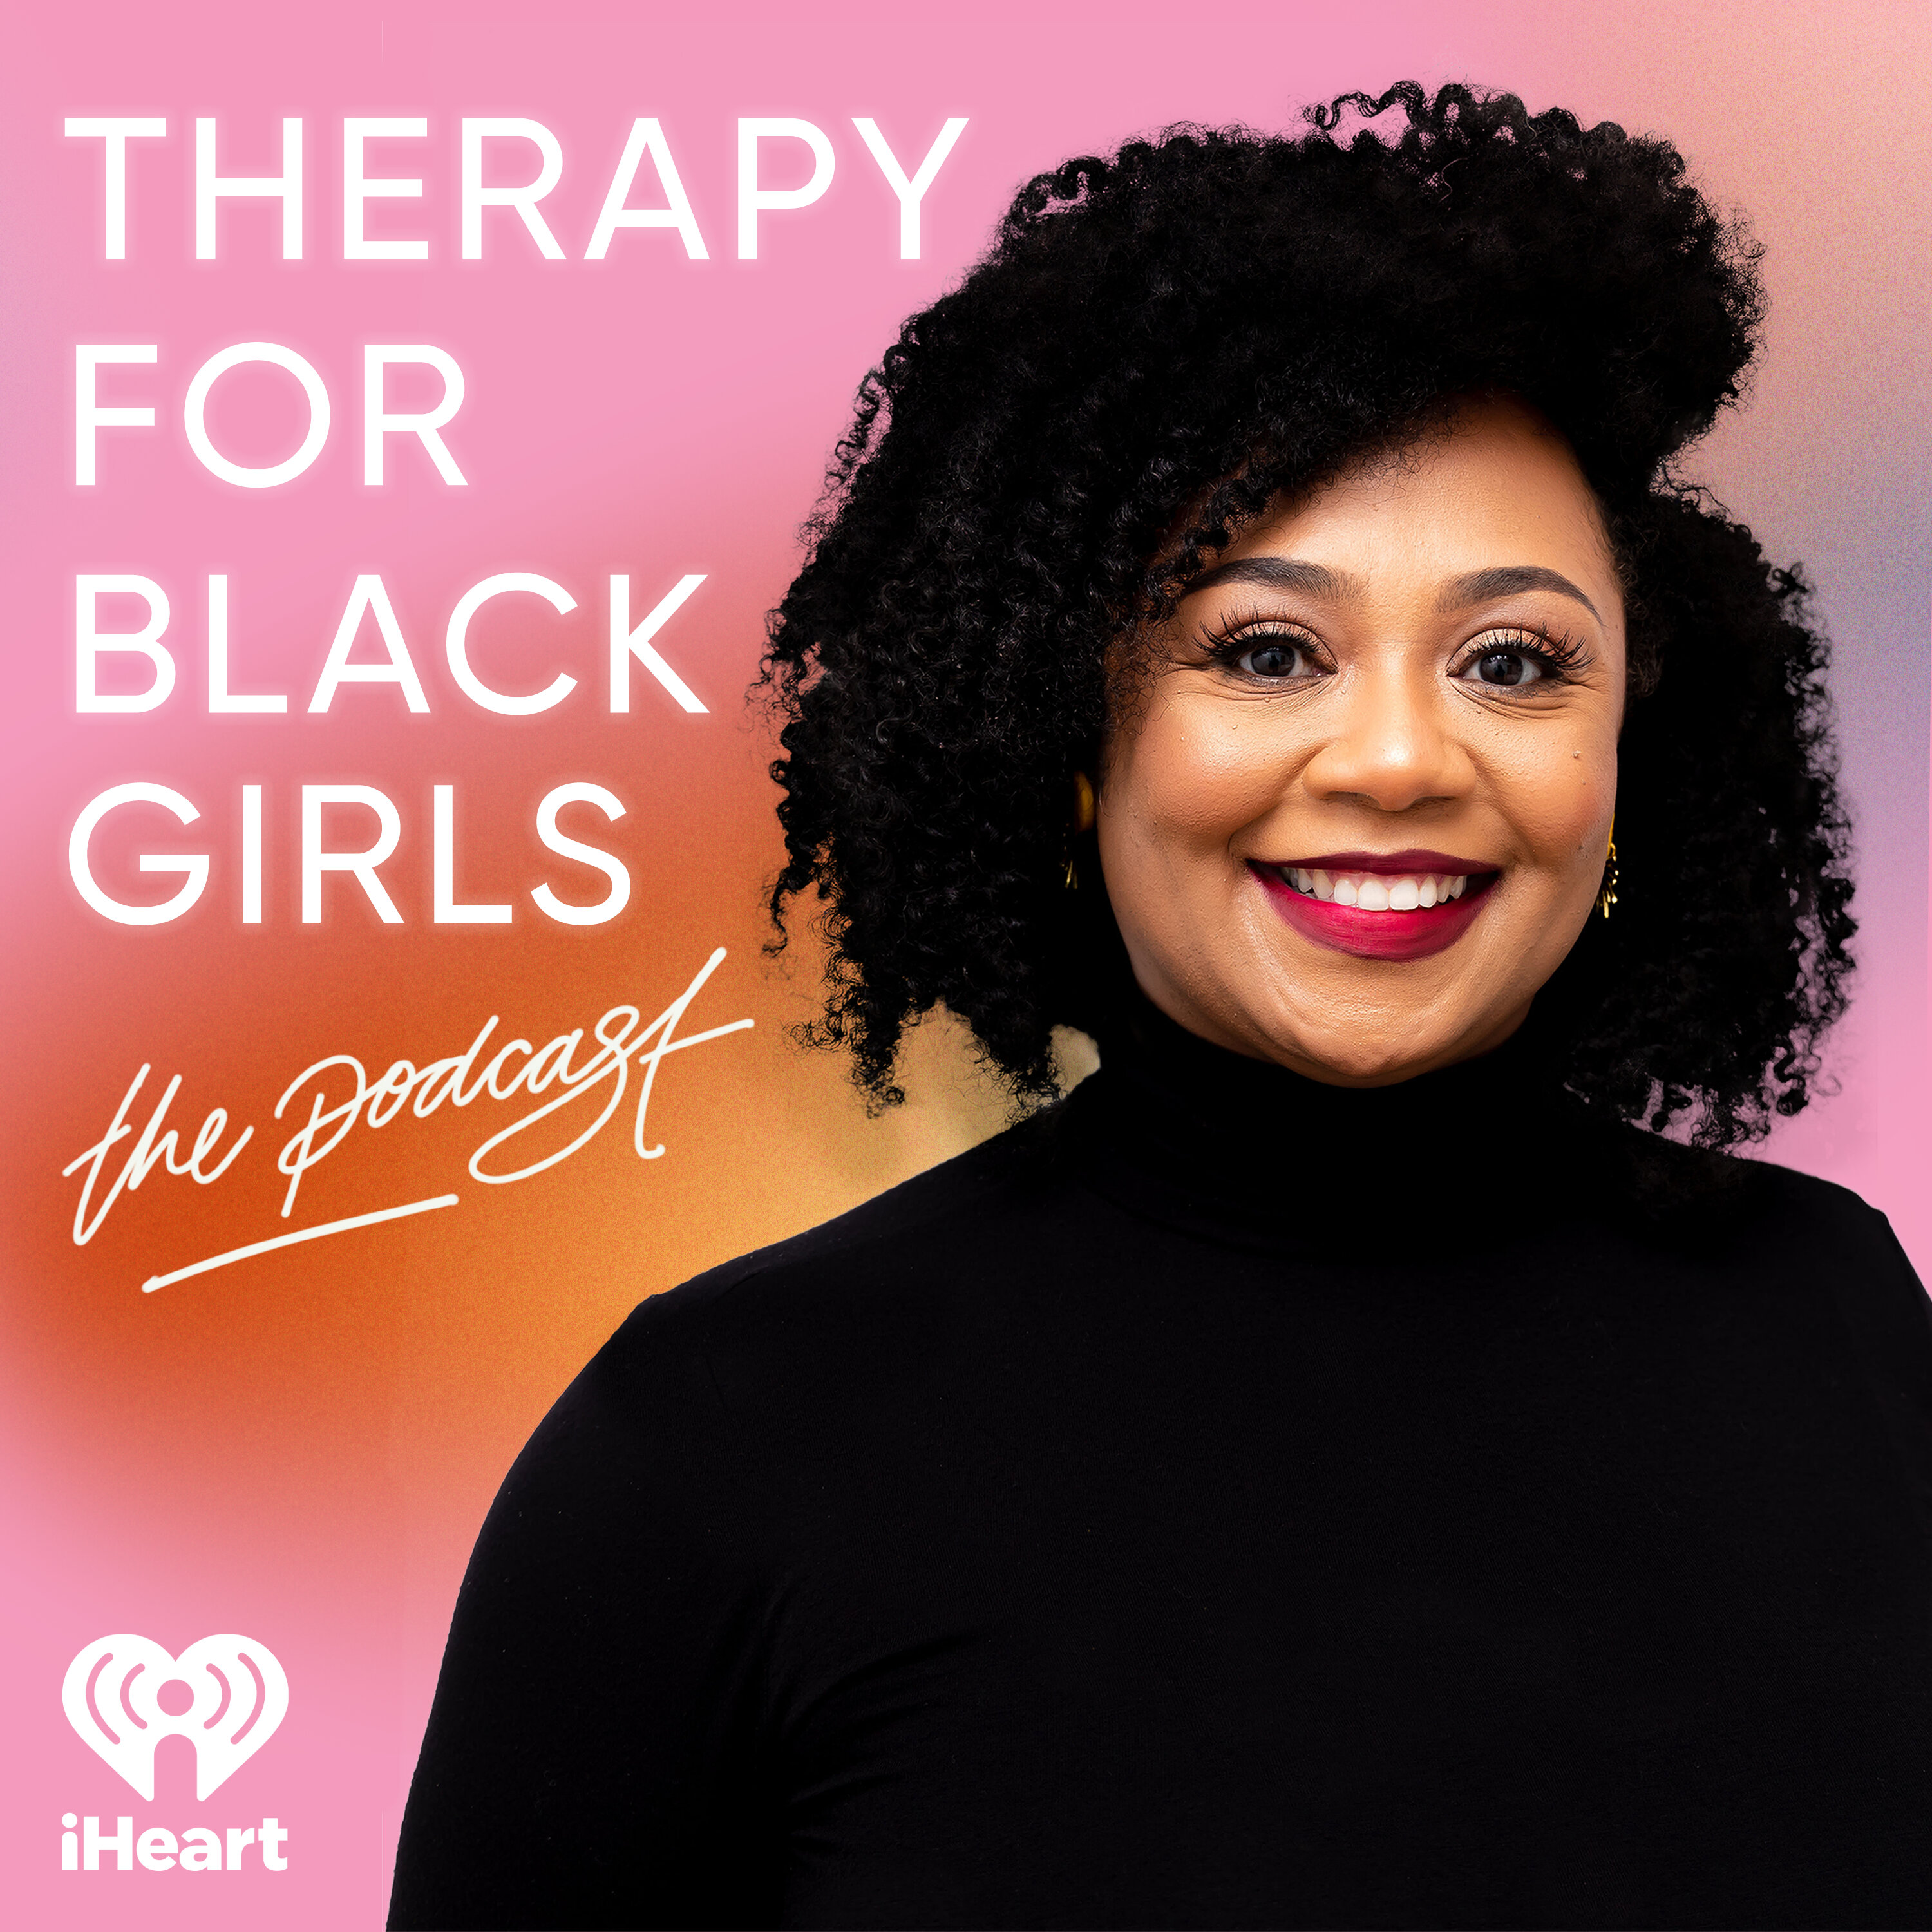 Therapy for Black Girls podcast show image